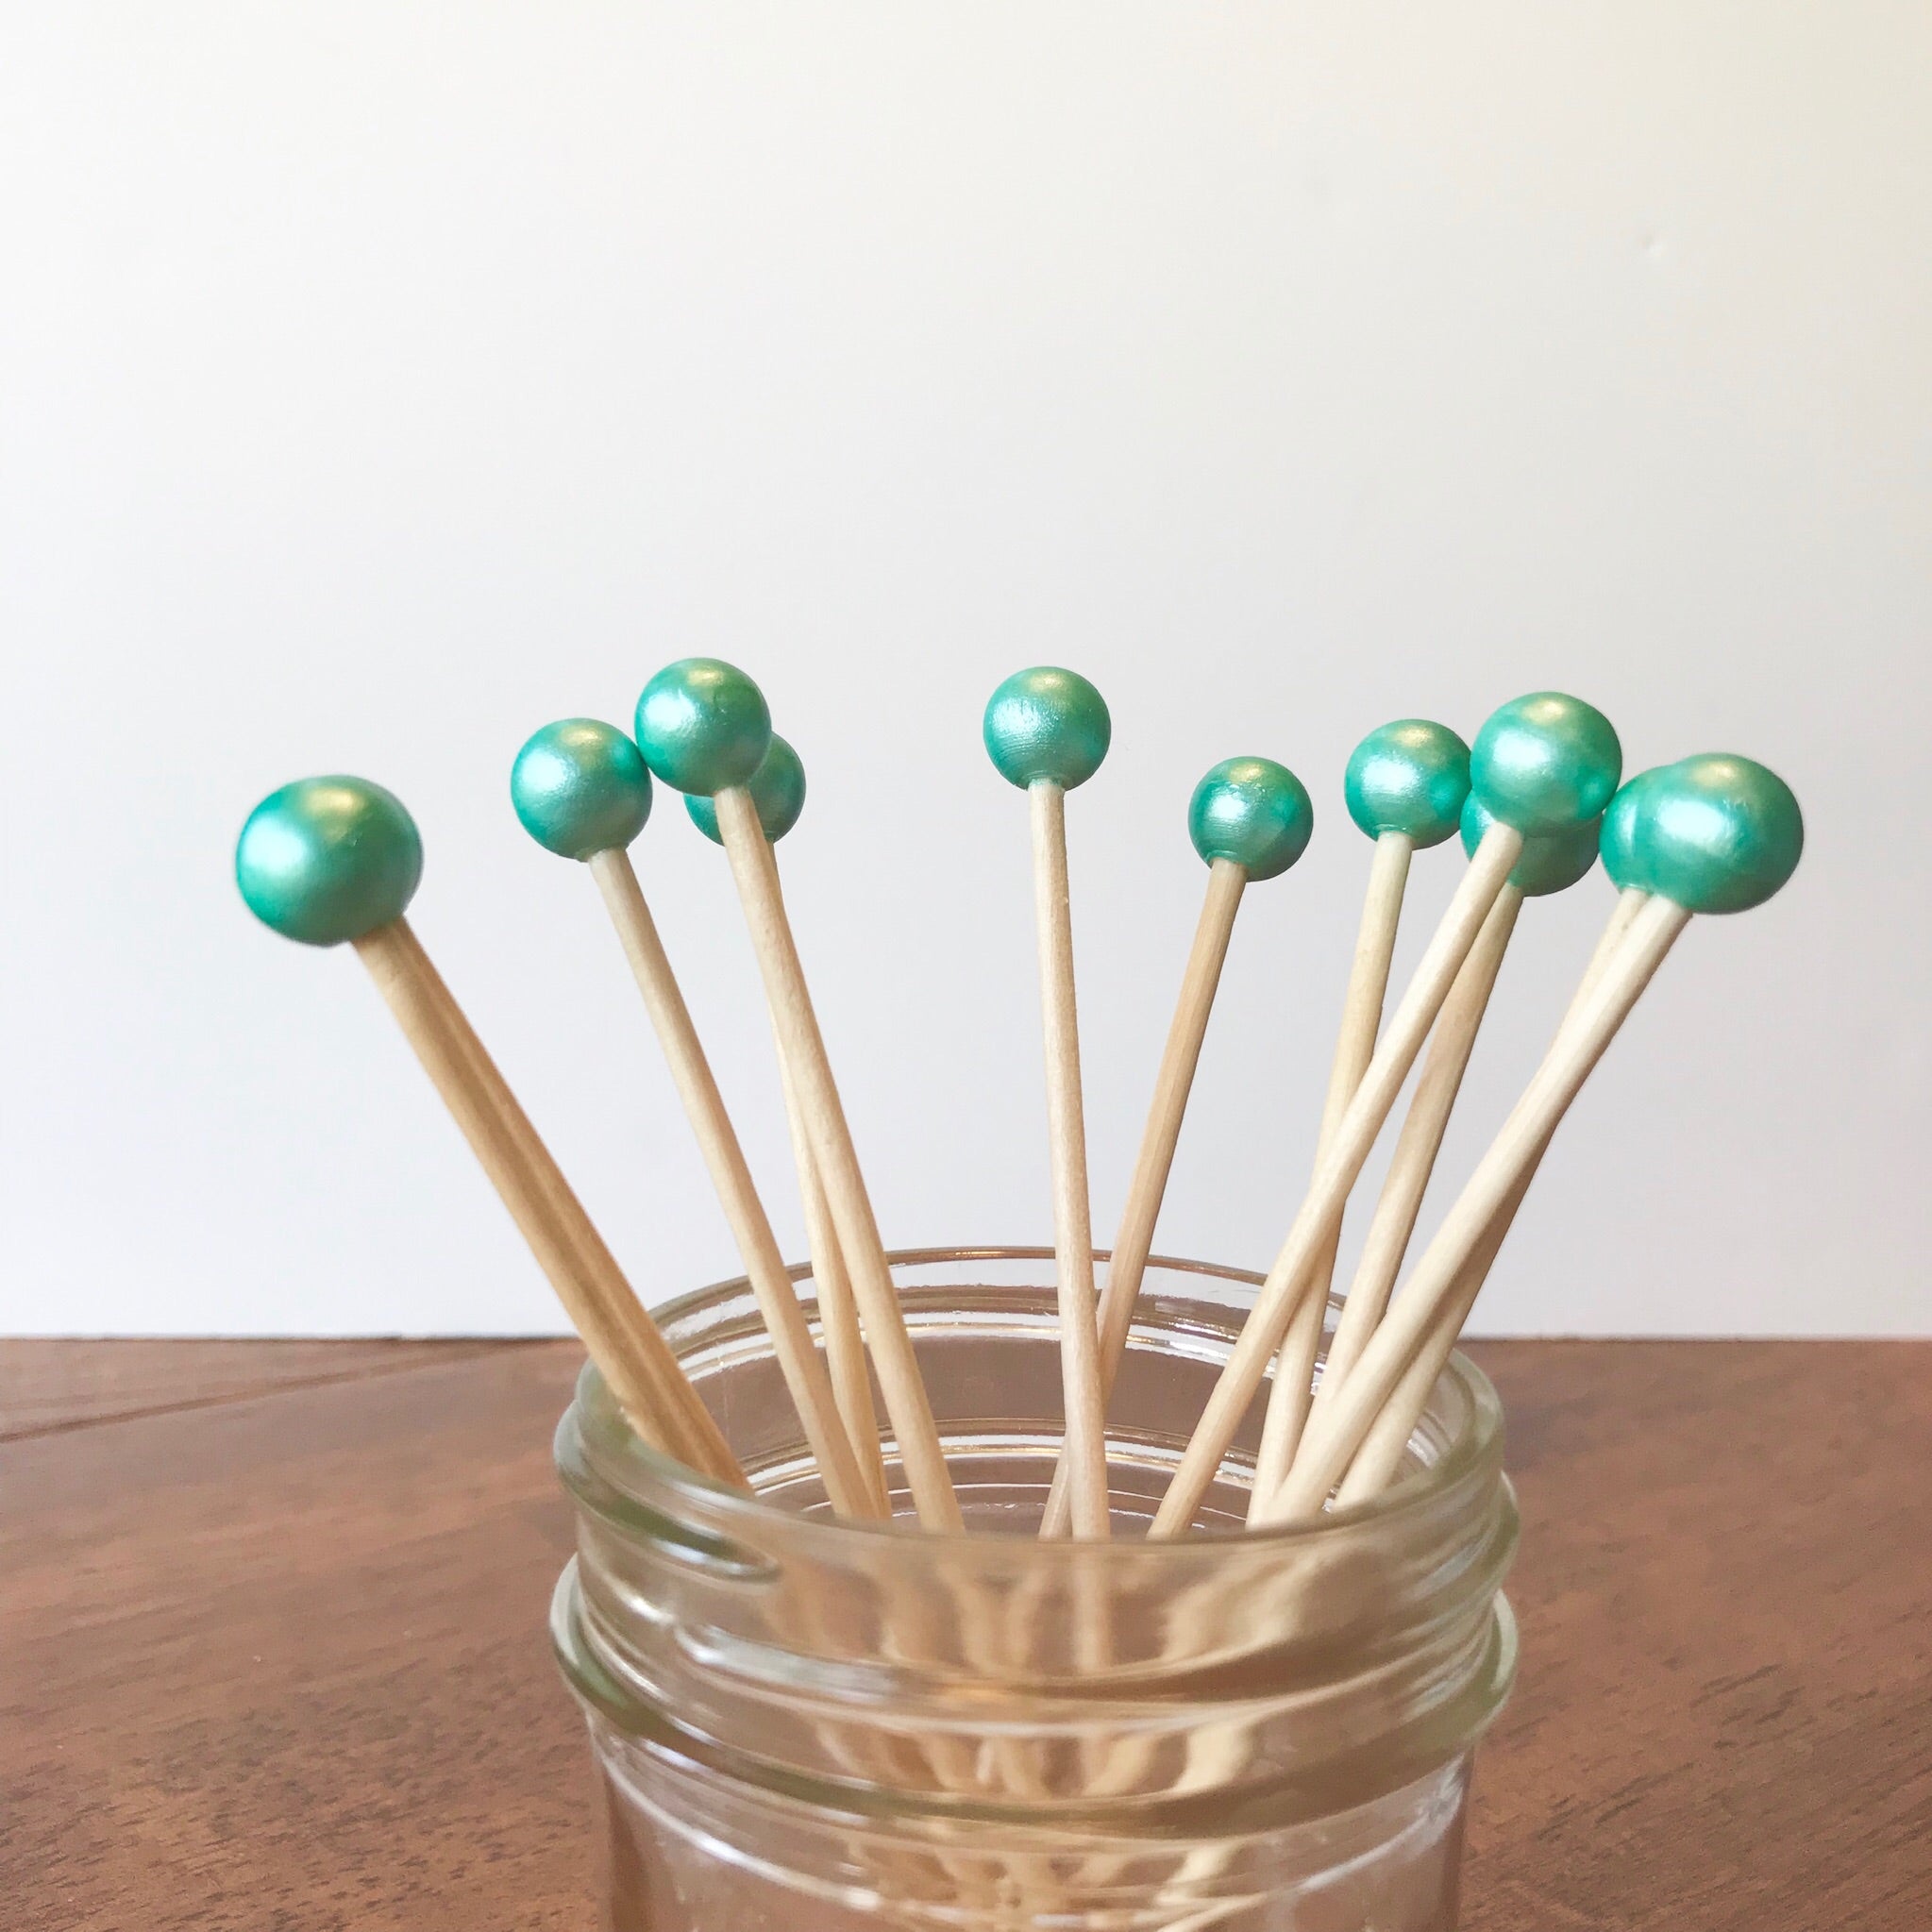 Metallic Teal Coffee, Drink and Cocktail Stirrers